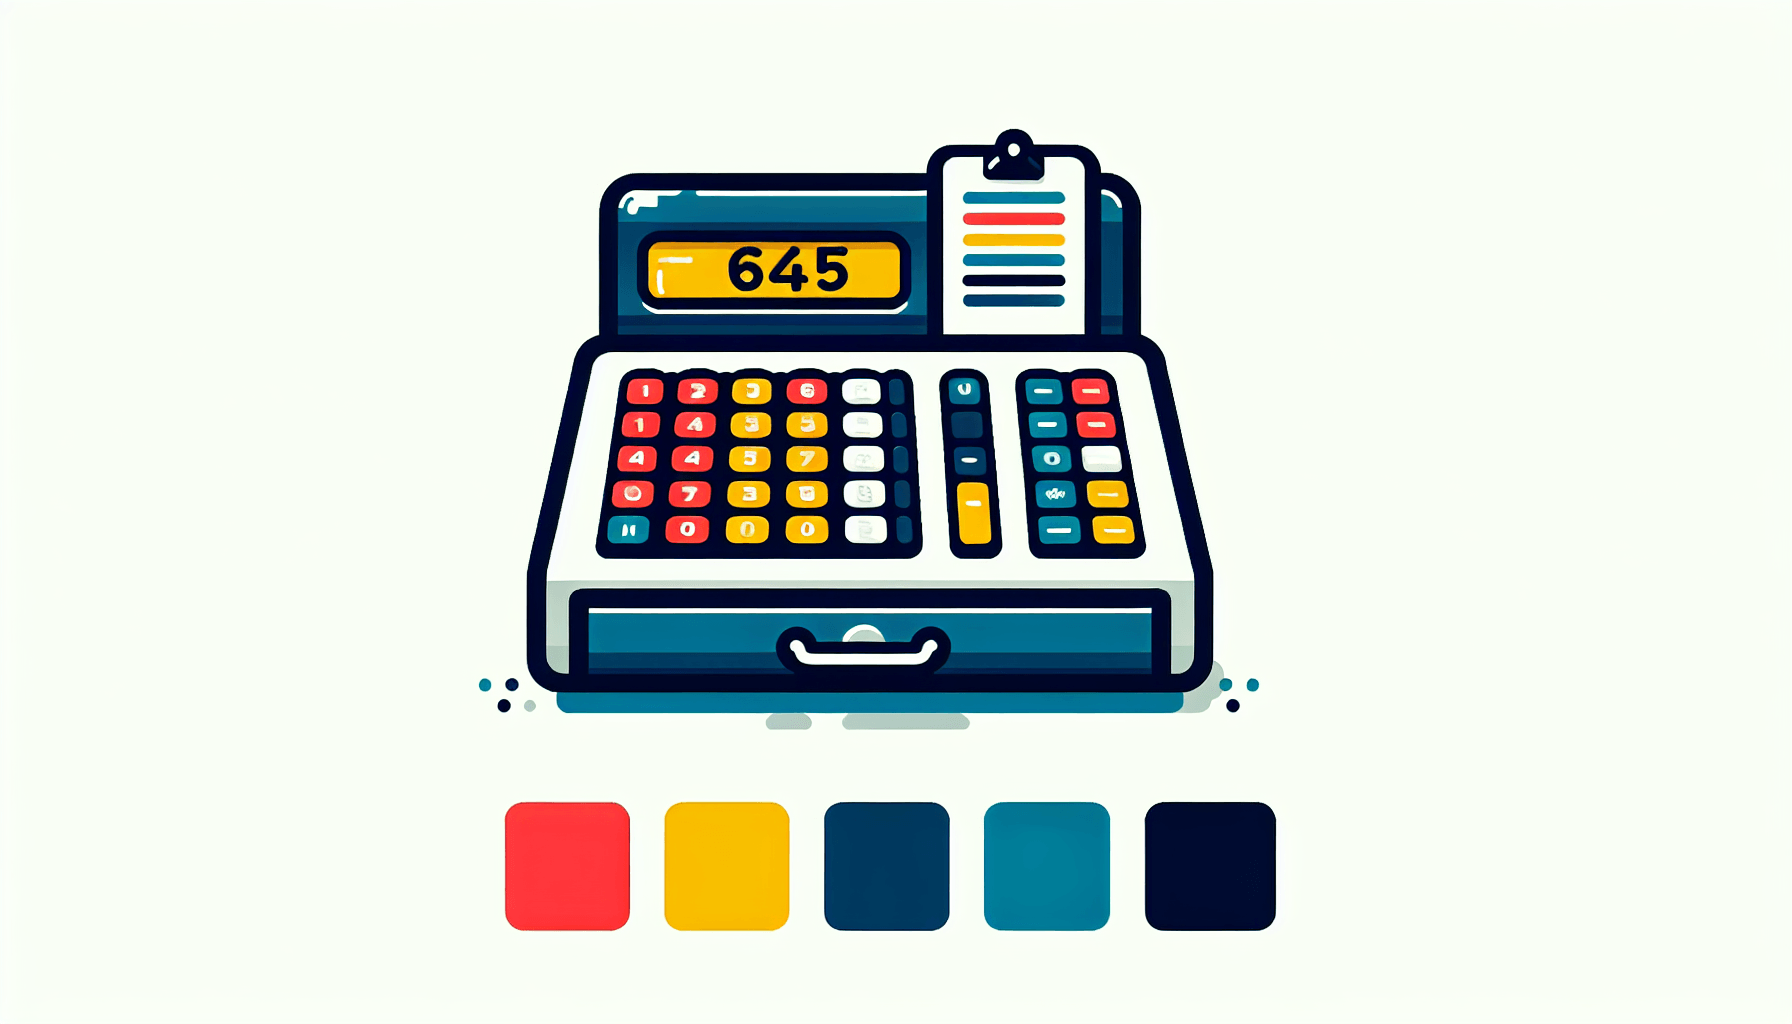 Cash register in flat illustration style and white background, red #f47574, green #88c7a8, yellow #fcc44b, and blue #645bc8 colors.